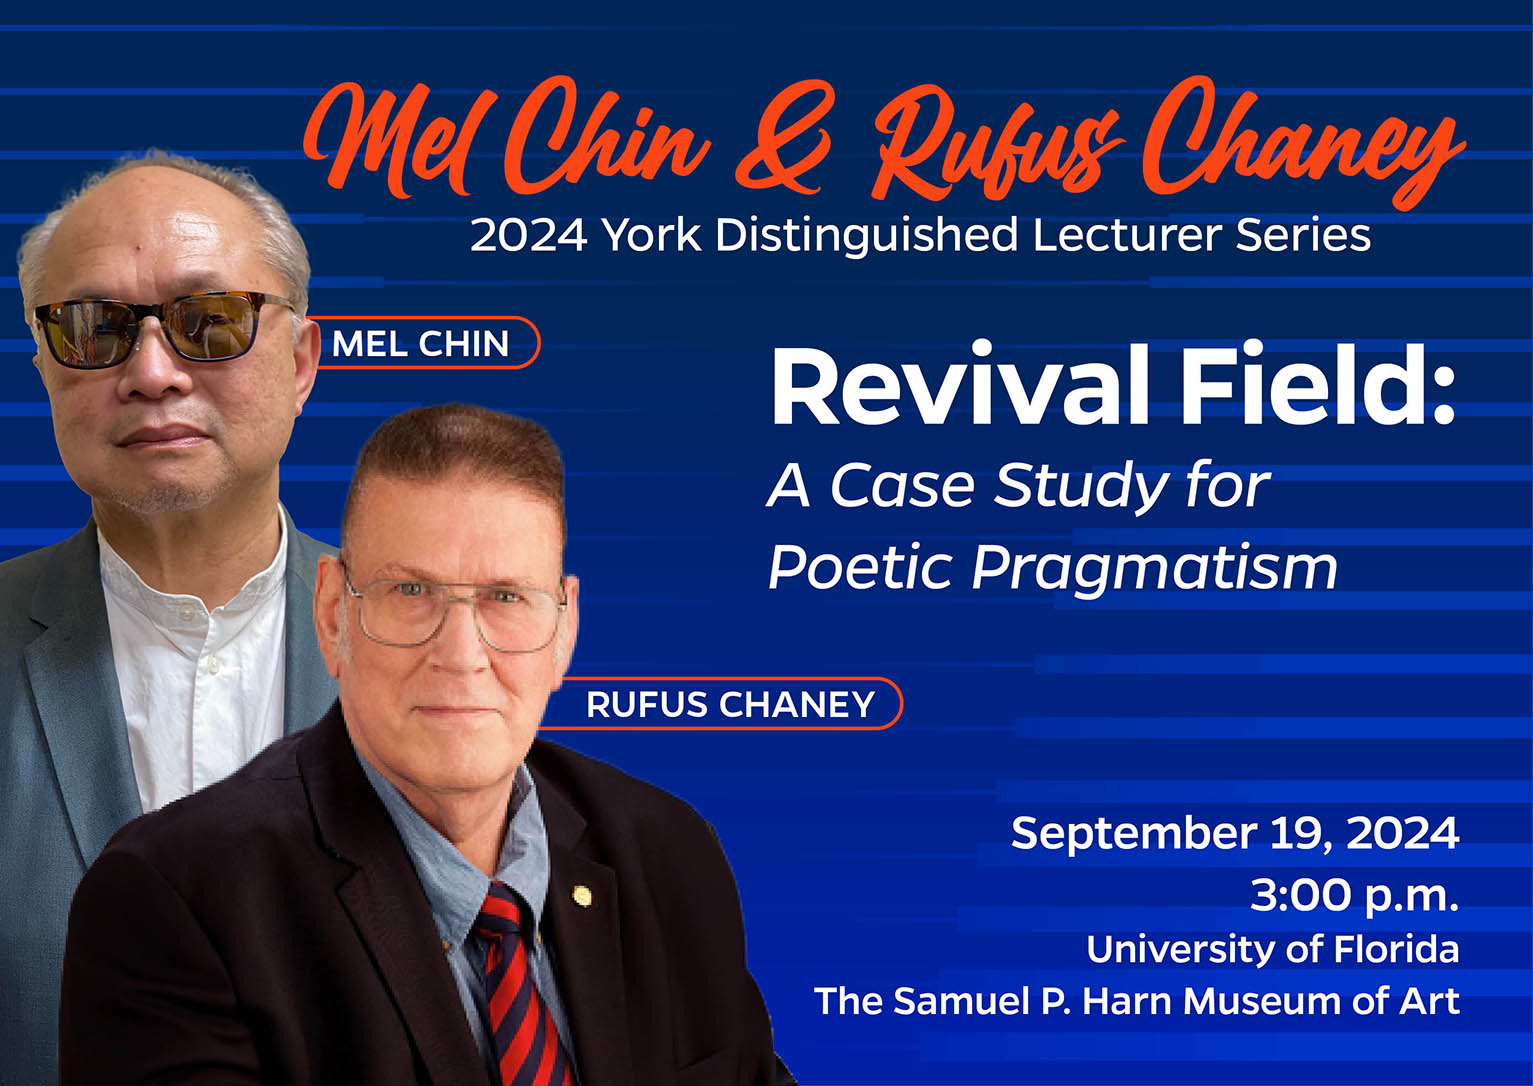 Mel Chin and Rufus Chaney - Revival Field: A Case Study for Poetic Pragmatism